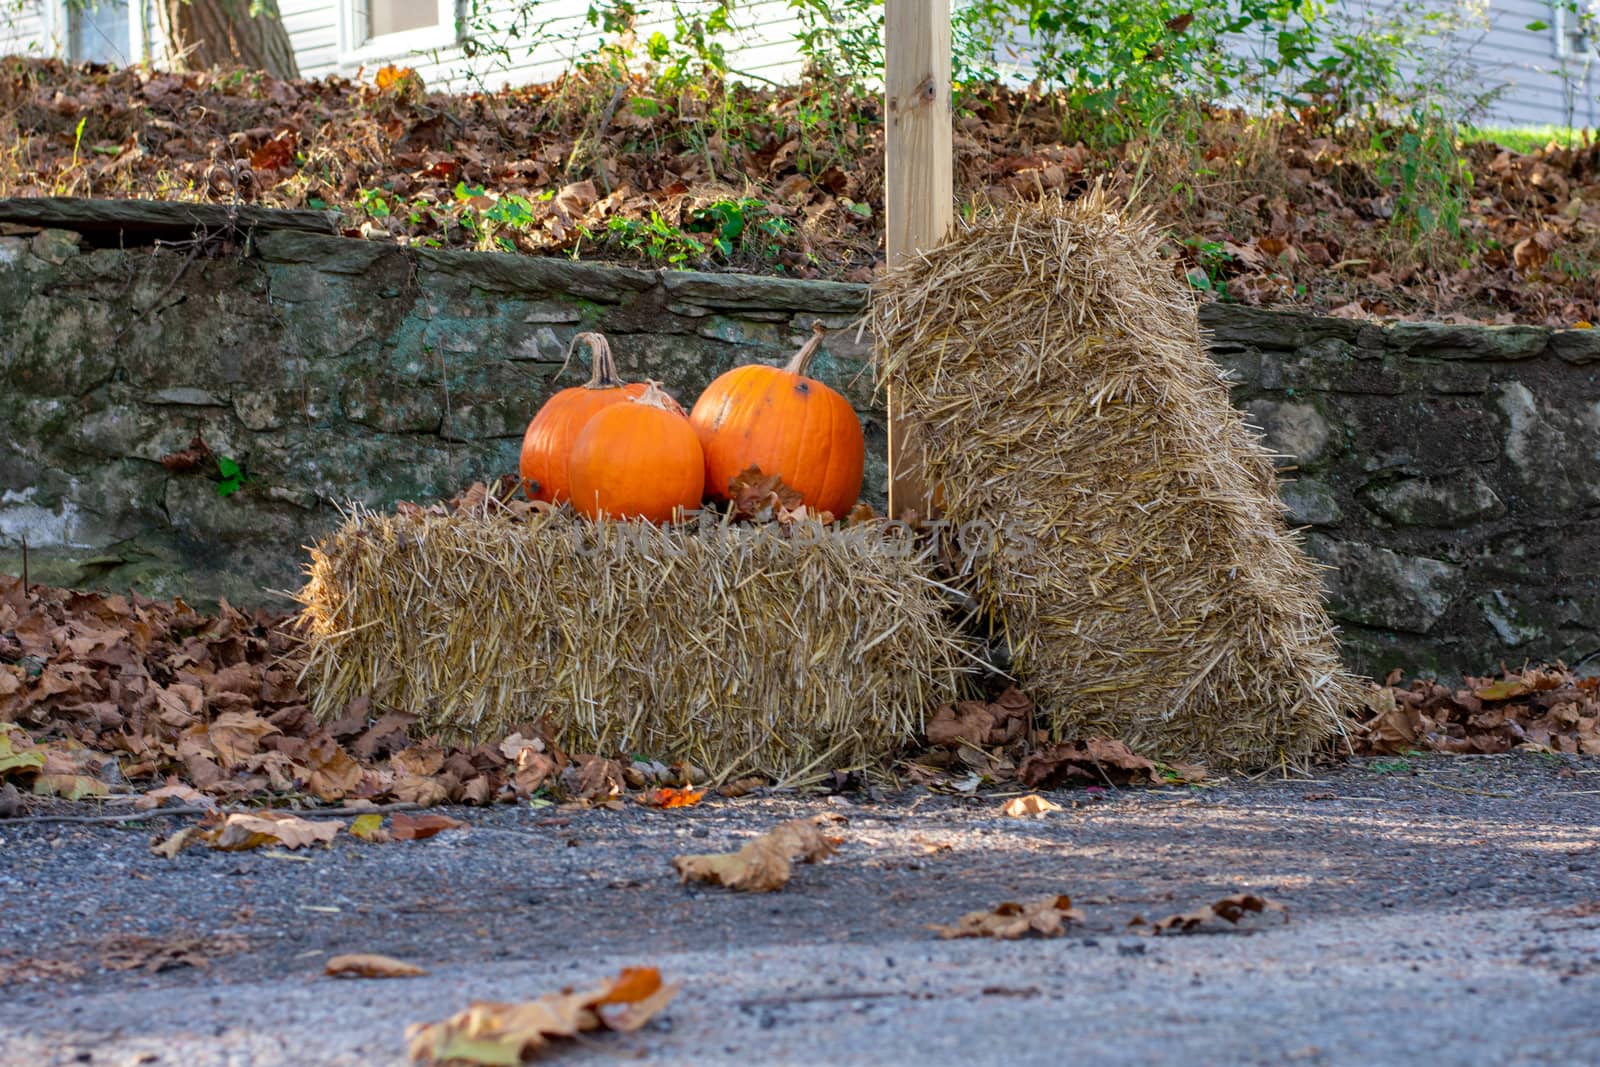 Three Bright Orange Pumpkins on a Hay Bale in Front of a Wooden Pole